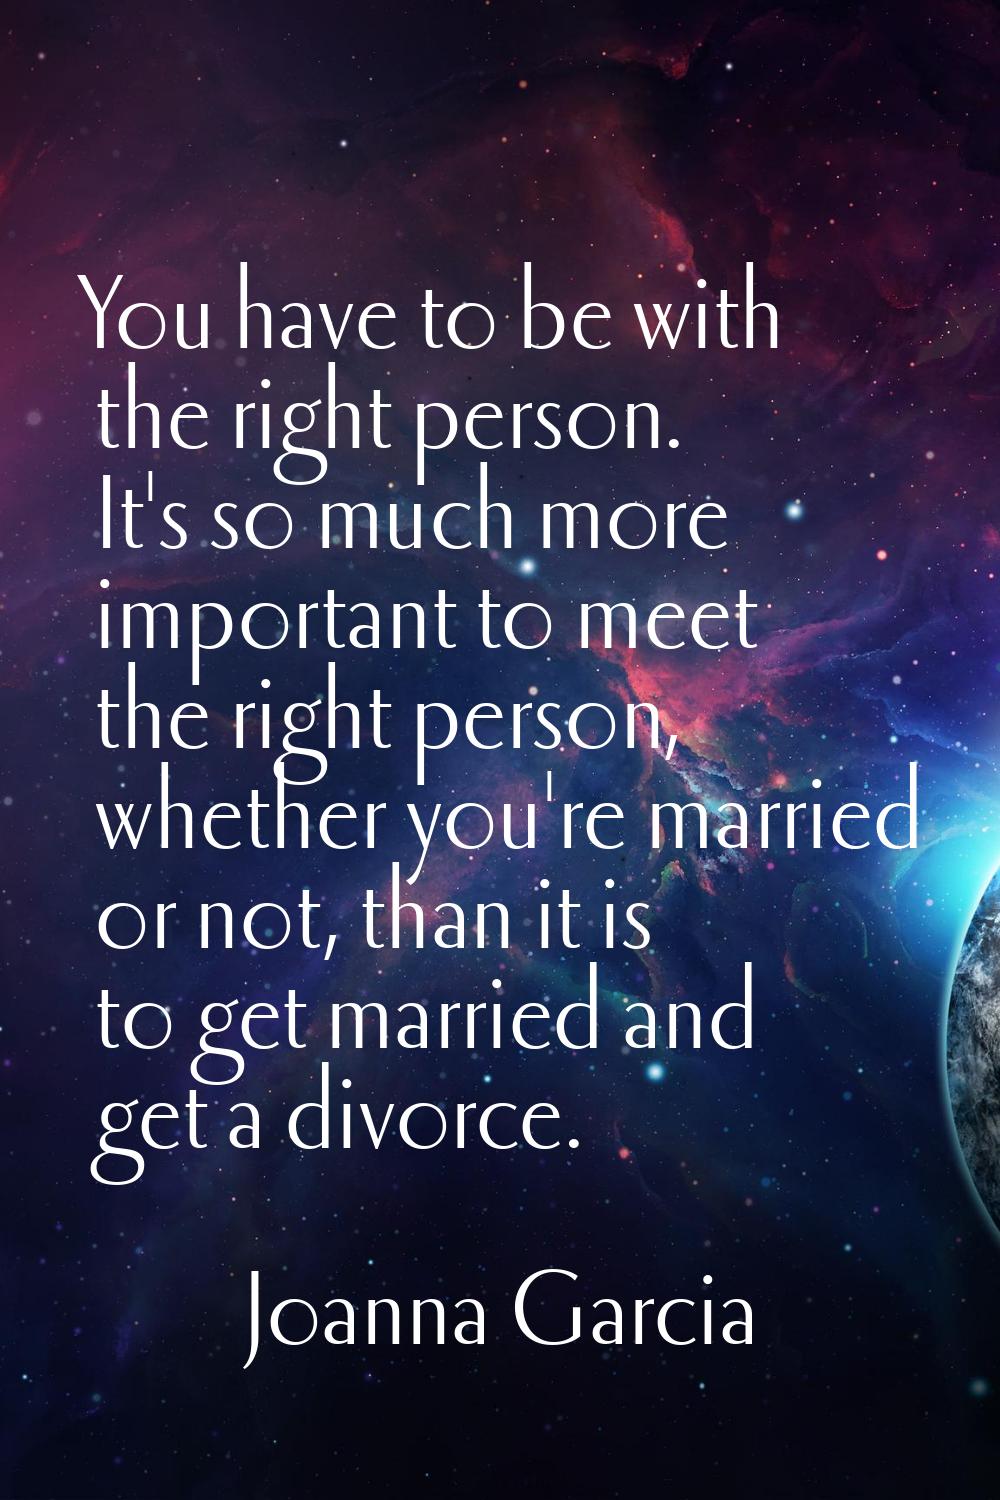 You have to be with the right person. It's so much more important to meet the right person, whether